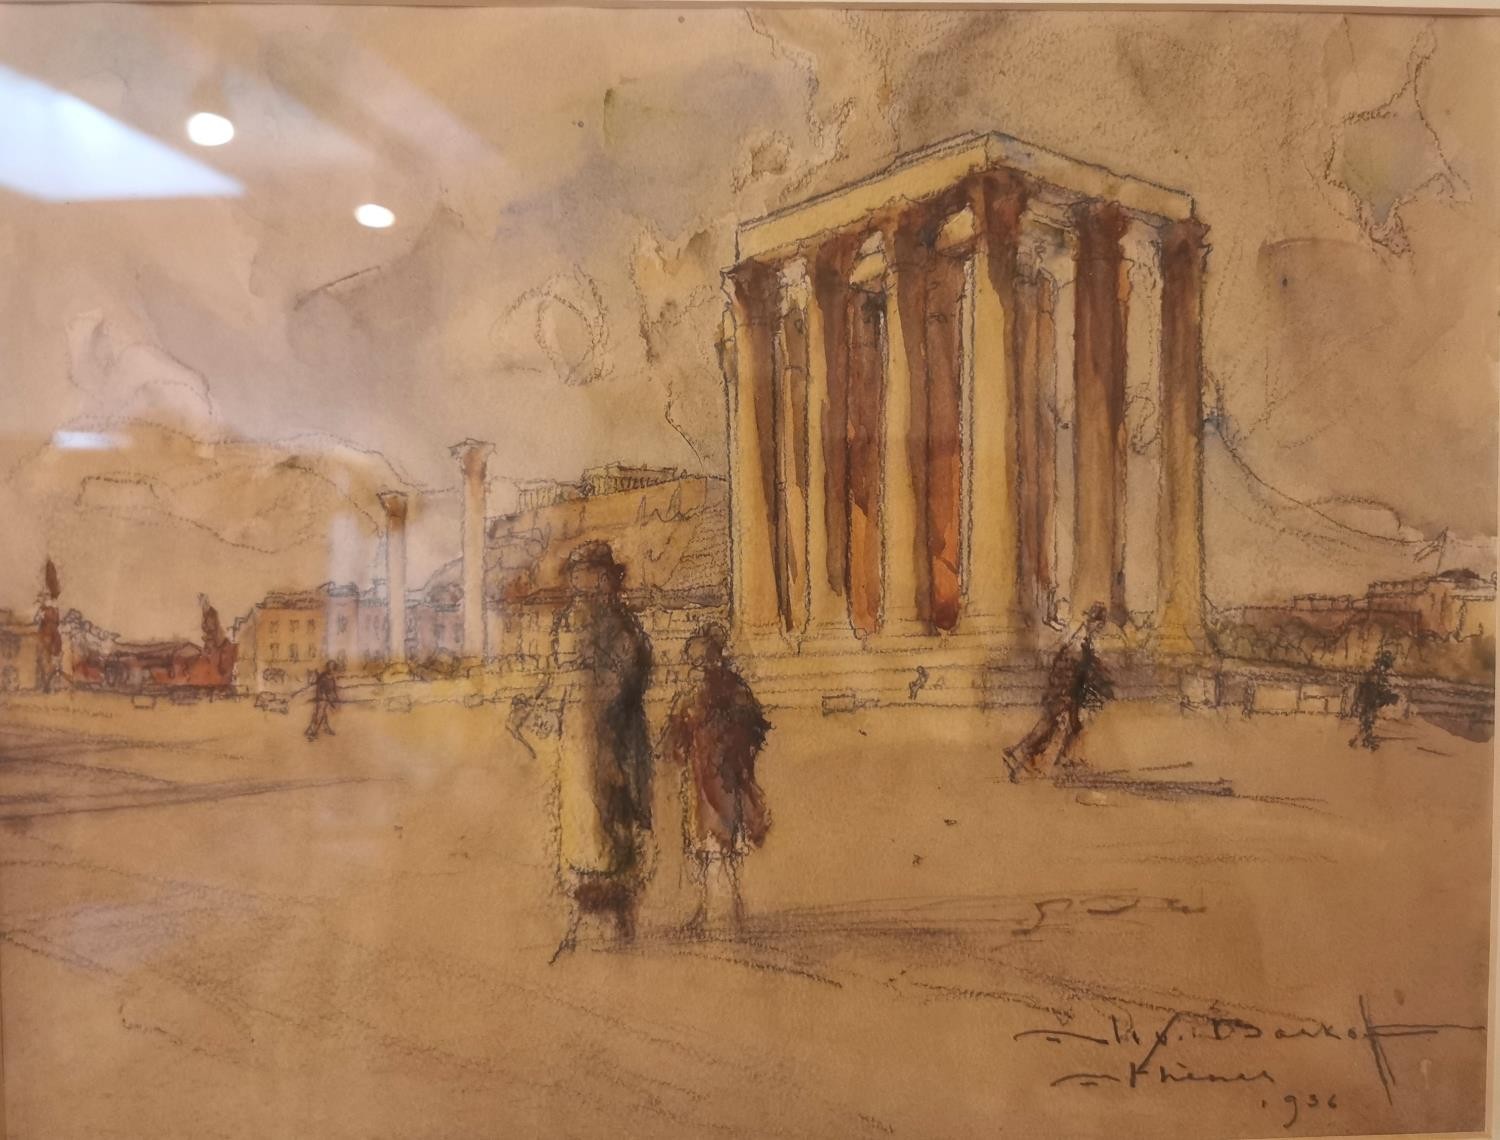 Alexander Barkoff, Greek, (1870-1942), watercolour and pencil on paper, visiting the ruins at - Image 4 of 9